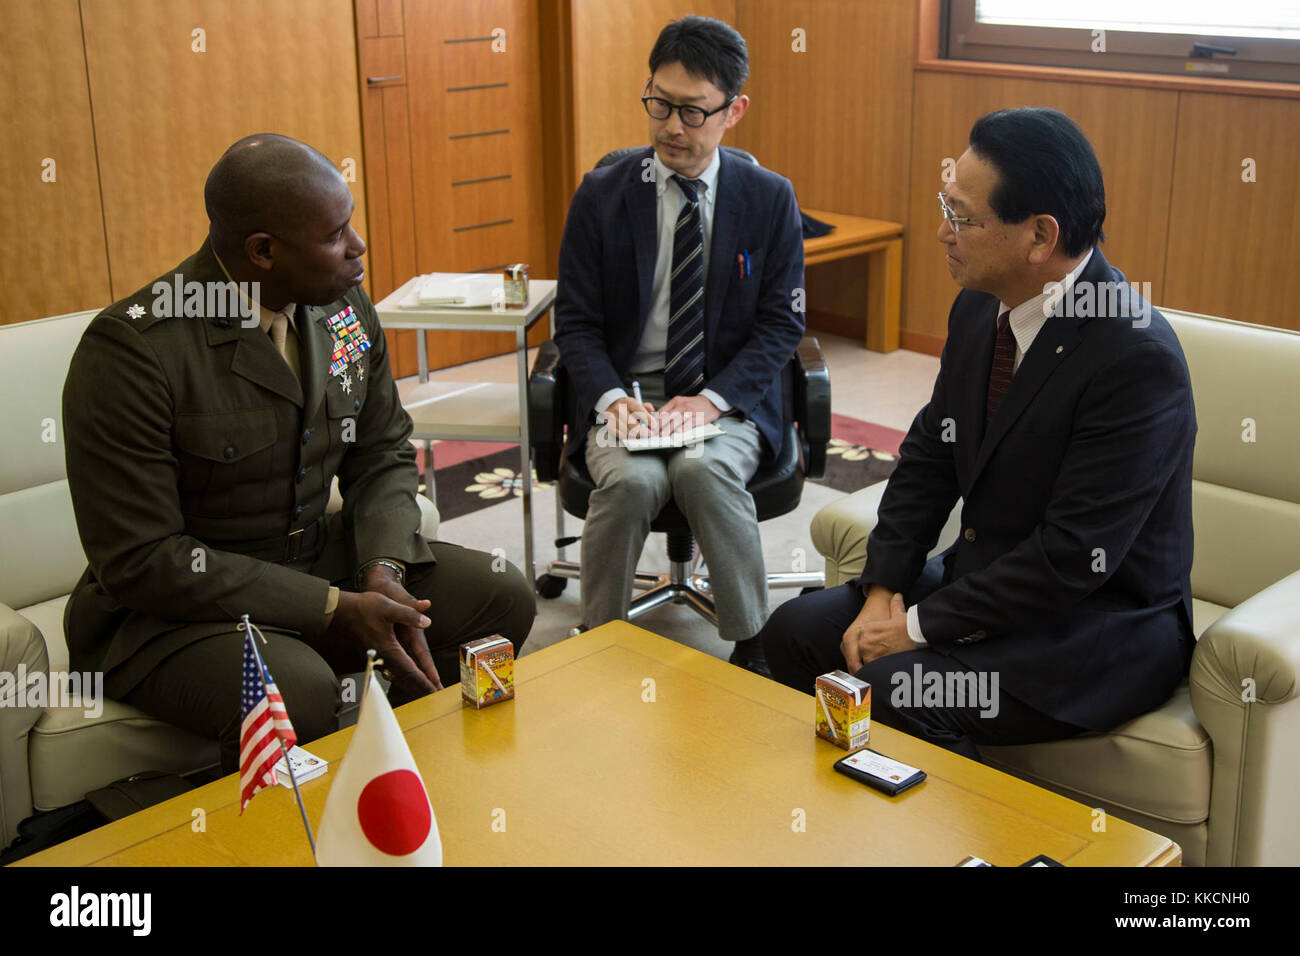 U.S. Marine Corps Lt. Col. Leroy Bryant Butler, battalion commander, 3rd Battalion, 12th Marine Regiment, meets with Mr. Kozo Sone, Mayor of Betsukai, during the Artillery Relocation Training Program (ARTP) 17-3 at Betsukai, Hokkaido, Japan on November 27, 2017. ARTP 17-3 is an annual training exercise that helps Marines to sustain and improve occupational and common skills through simulated real world training scenarios, enhancing their combat operational readiness and improving international relationships through the U.S.-Japan Treaty of Mutual Cooperation and Security. (U.S. Marine Corps ph Stock Photo